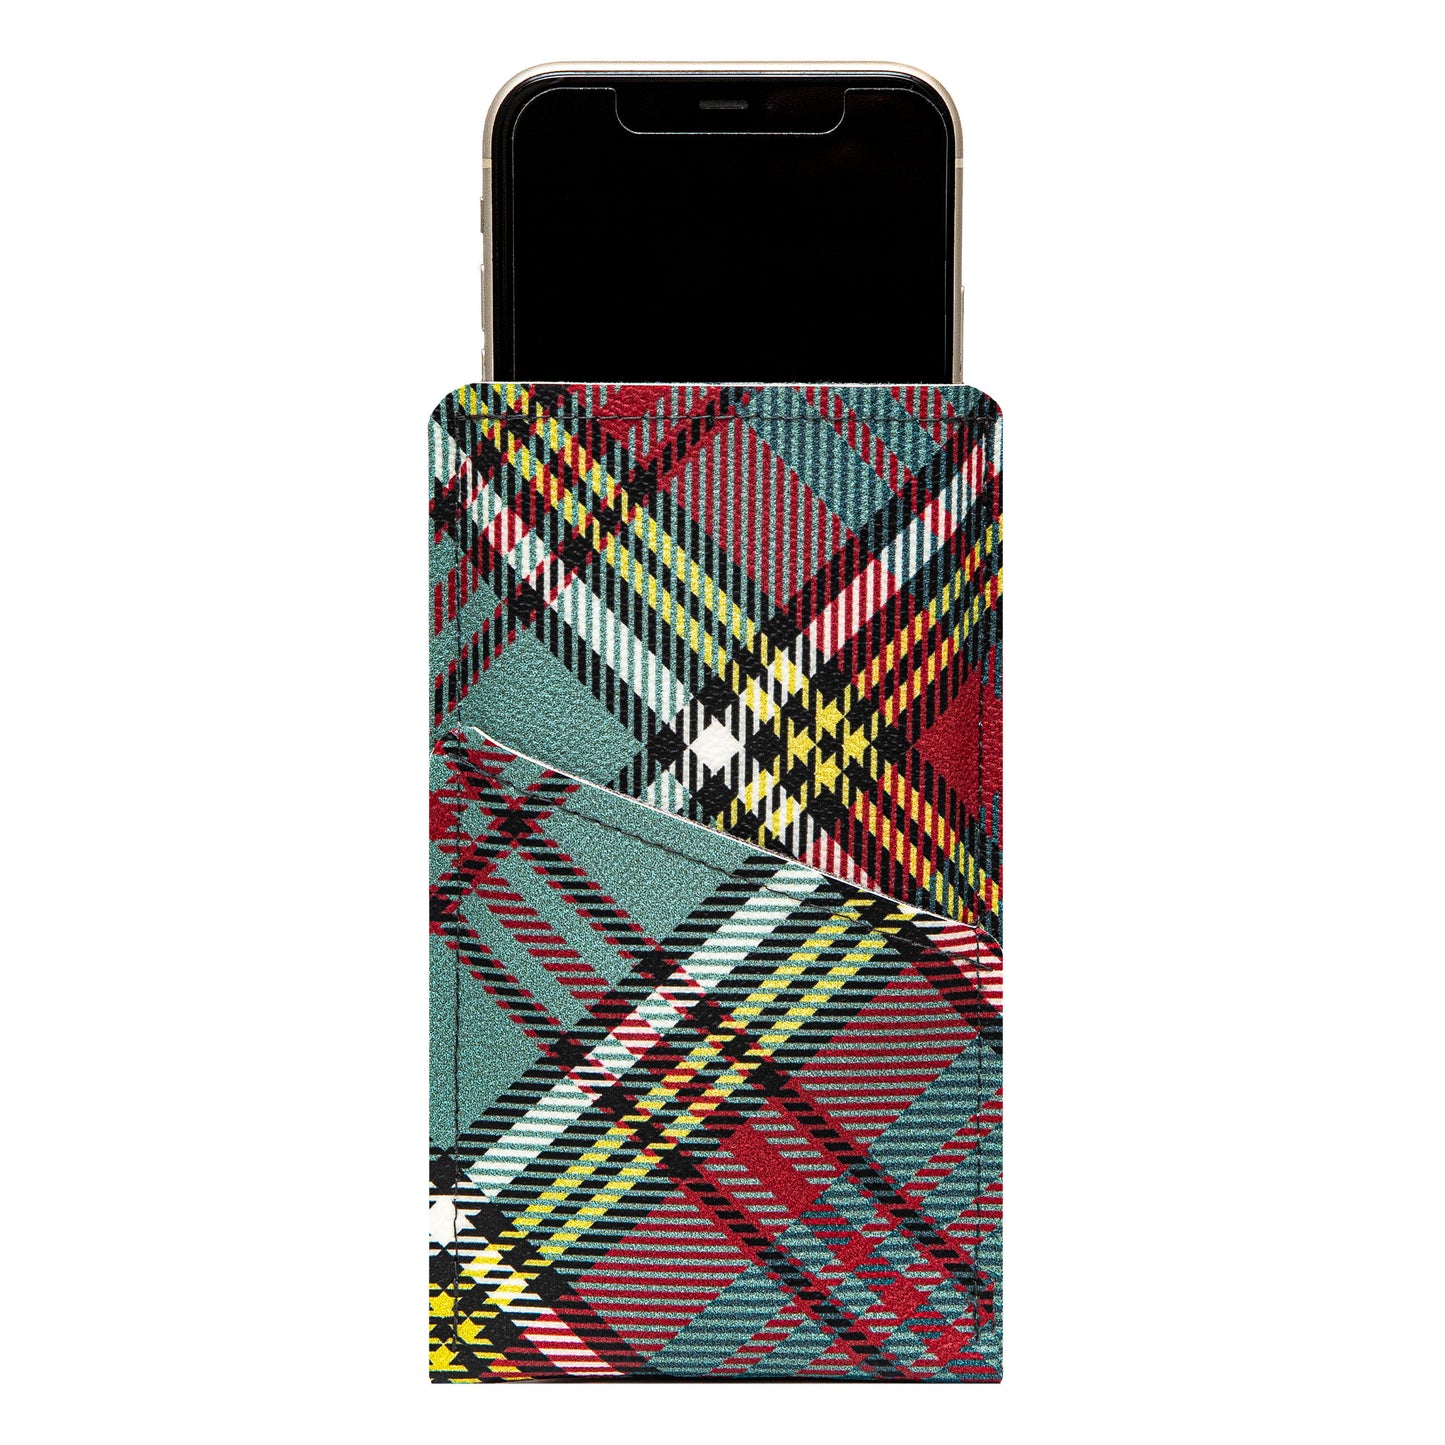 Modern Faux Leather iPhone Sleeve with Vibrant Colored Lines Design and Card Pocket